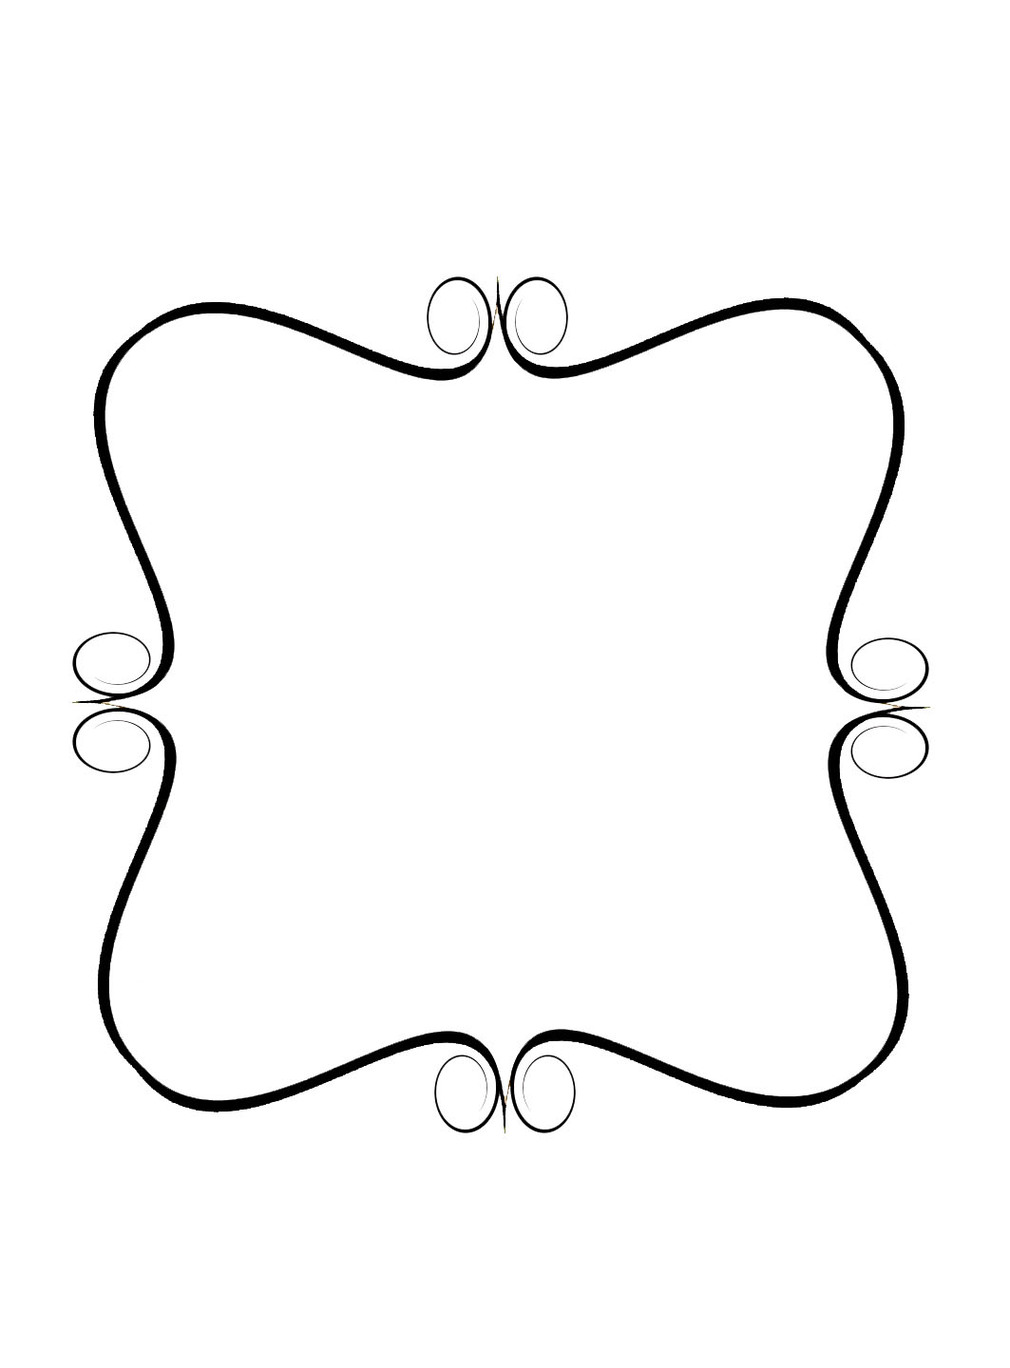 Simple Swirl Frame Clipart - Free to use Clip Art Resource